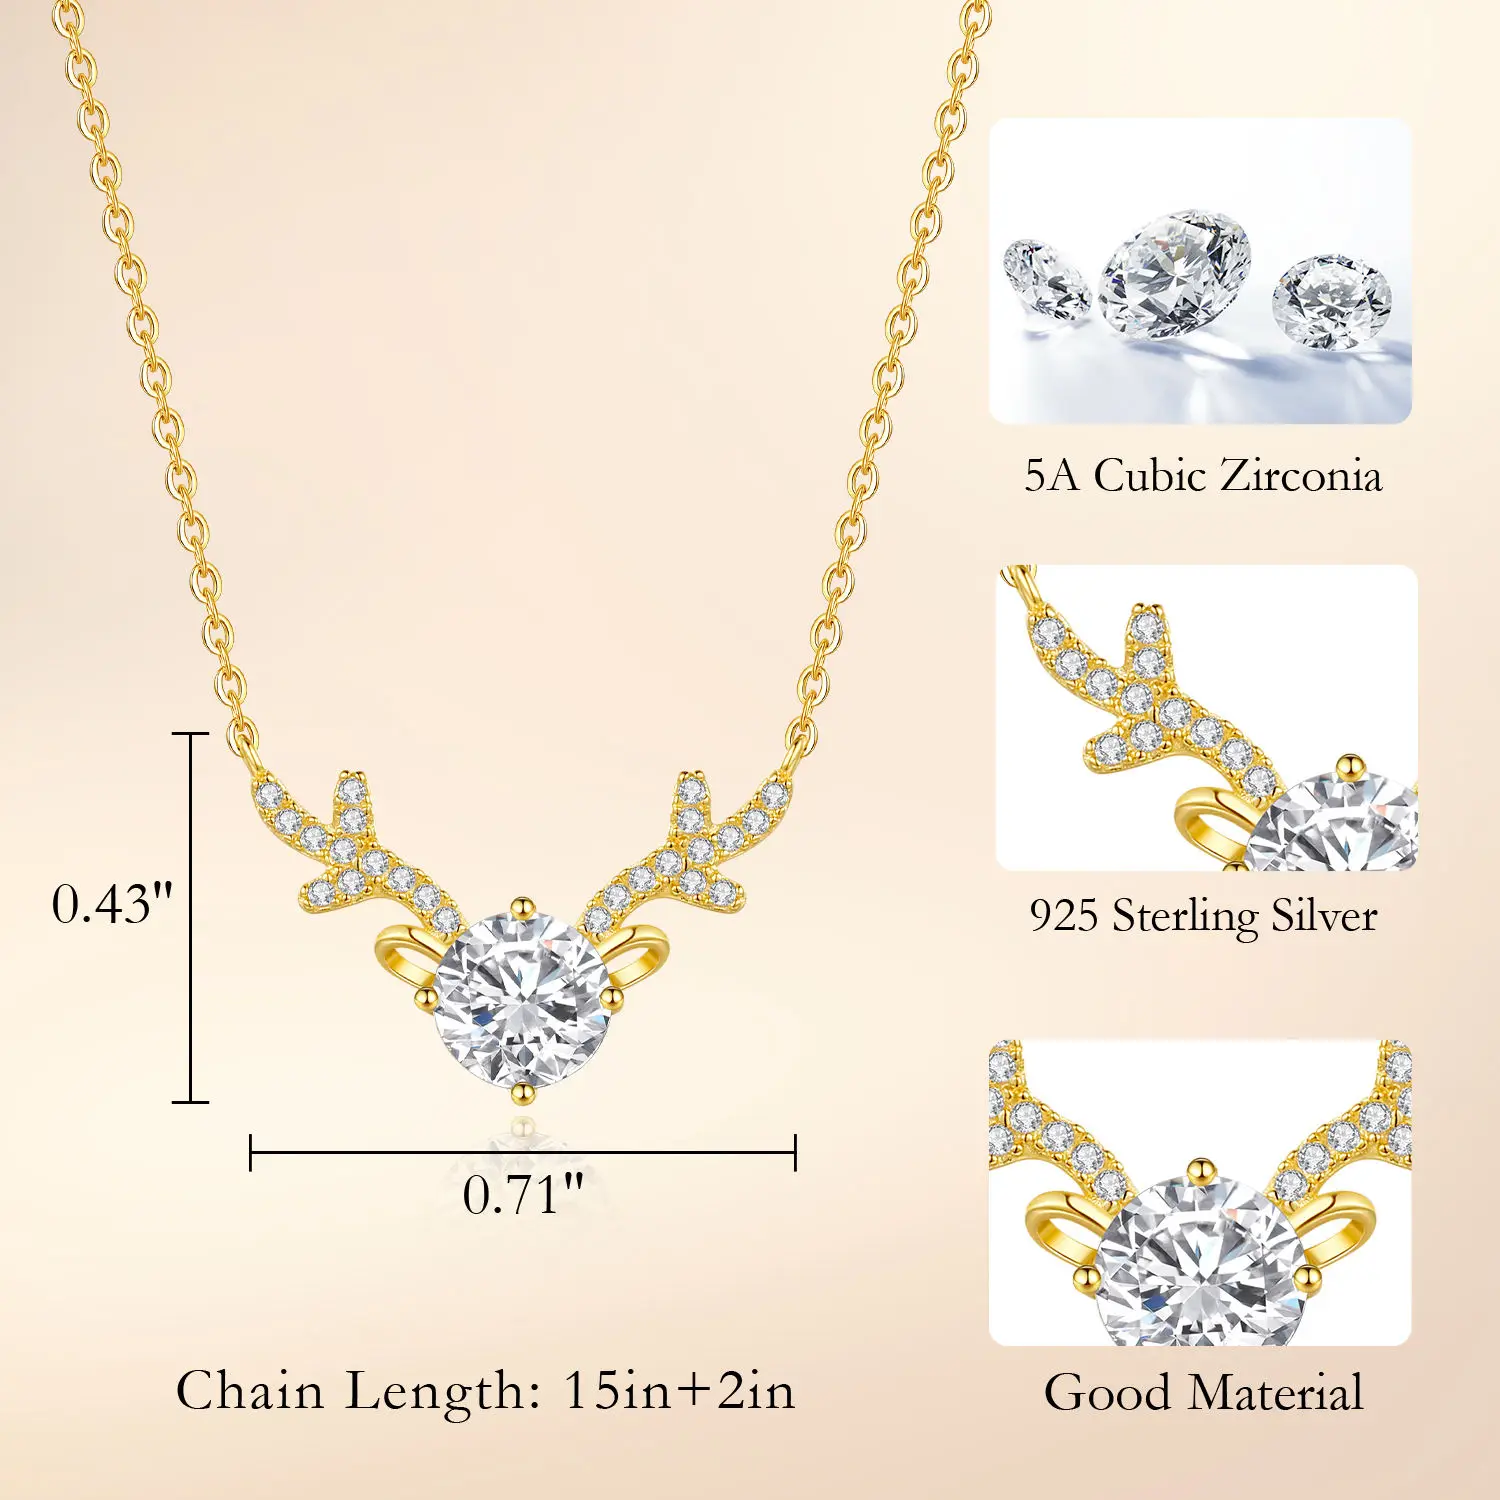 CDE CZYN024 Fine Jewelry Necklace S925 Silver Wholesale Deer 14K Gold Plated Christmas Gift Pendant Necklace